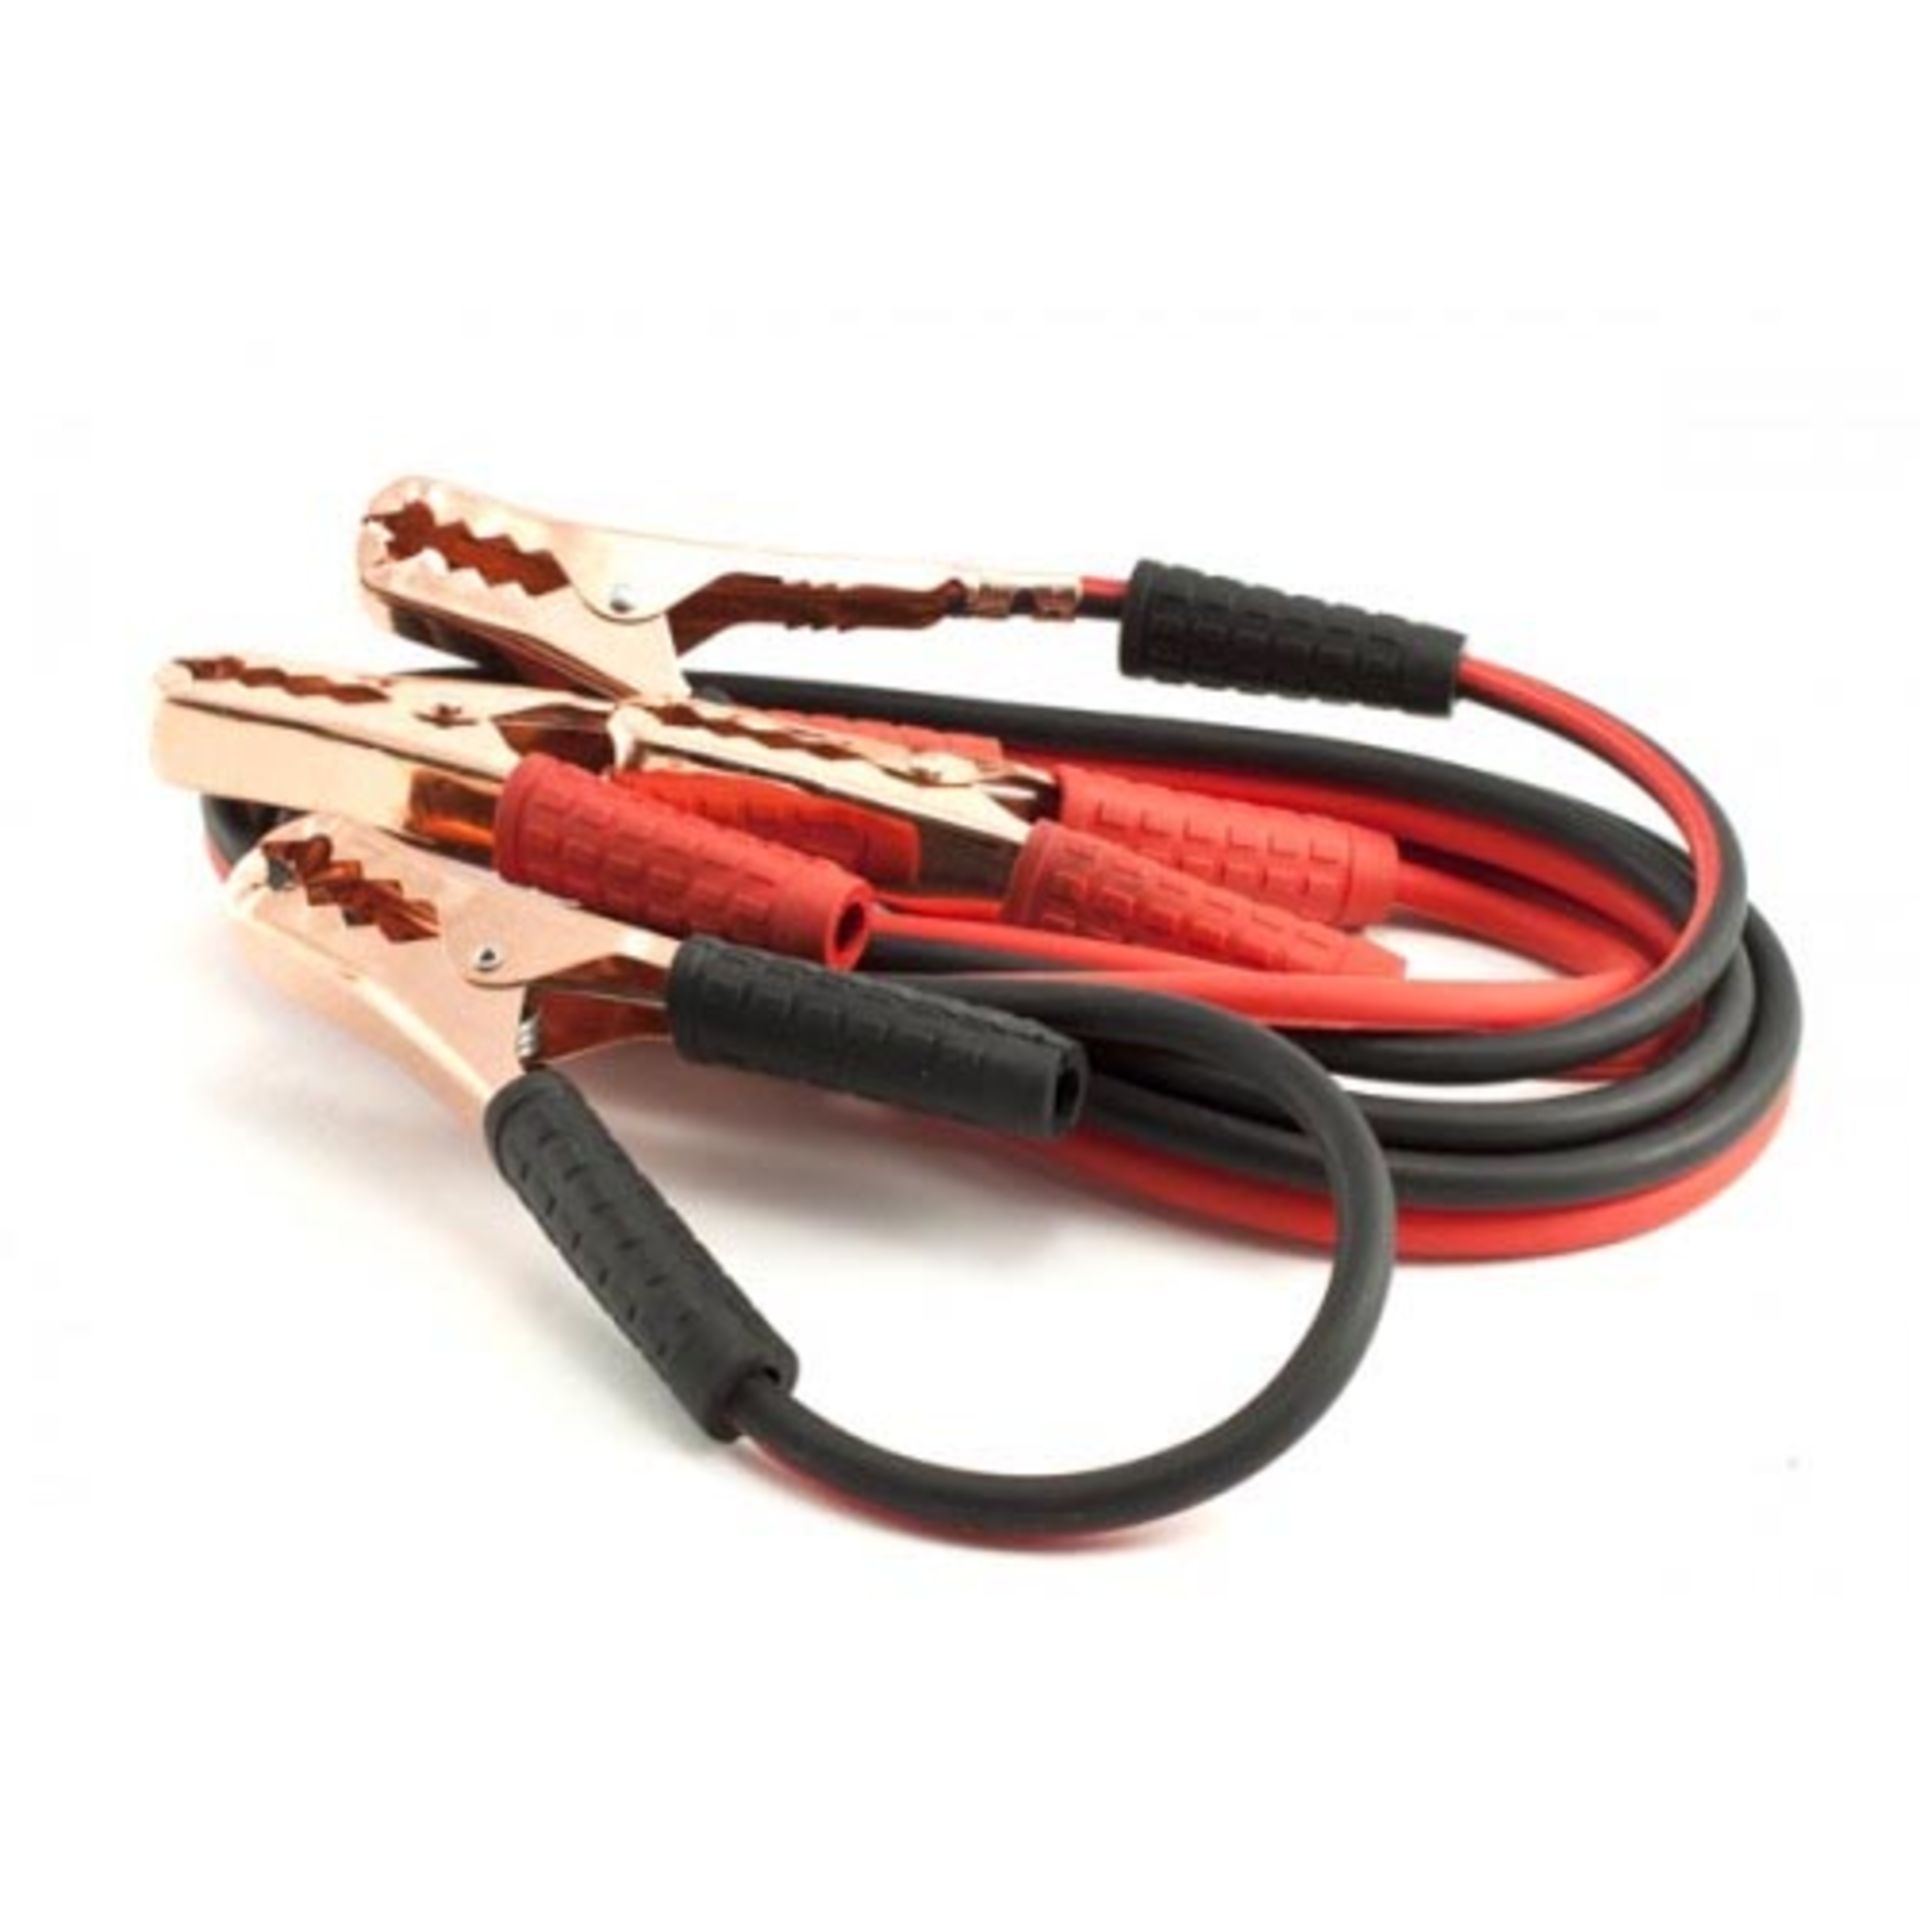 V Brand New 200AMP Booster Cables X 2 YOUR BID PRICE TO BE MULTIPLIED BY TWO - Image 2 of 2